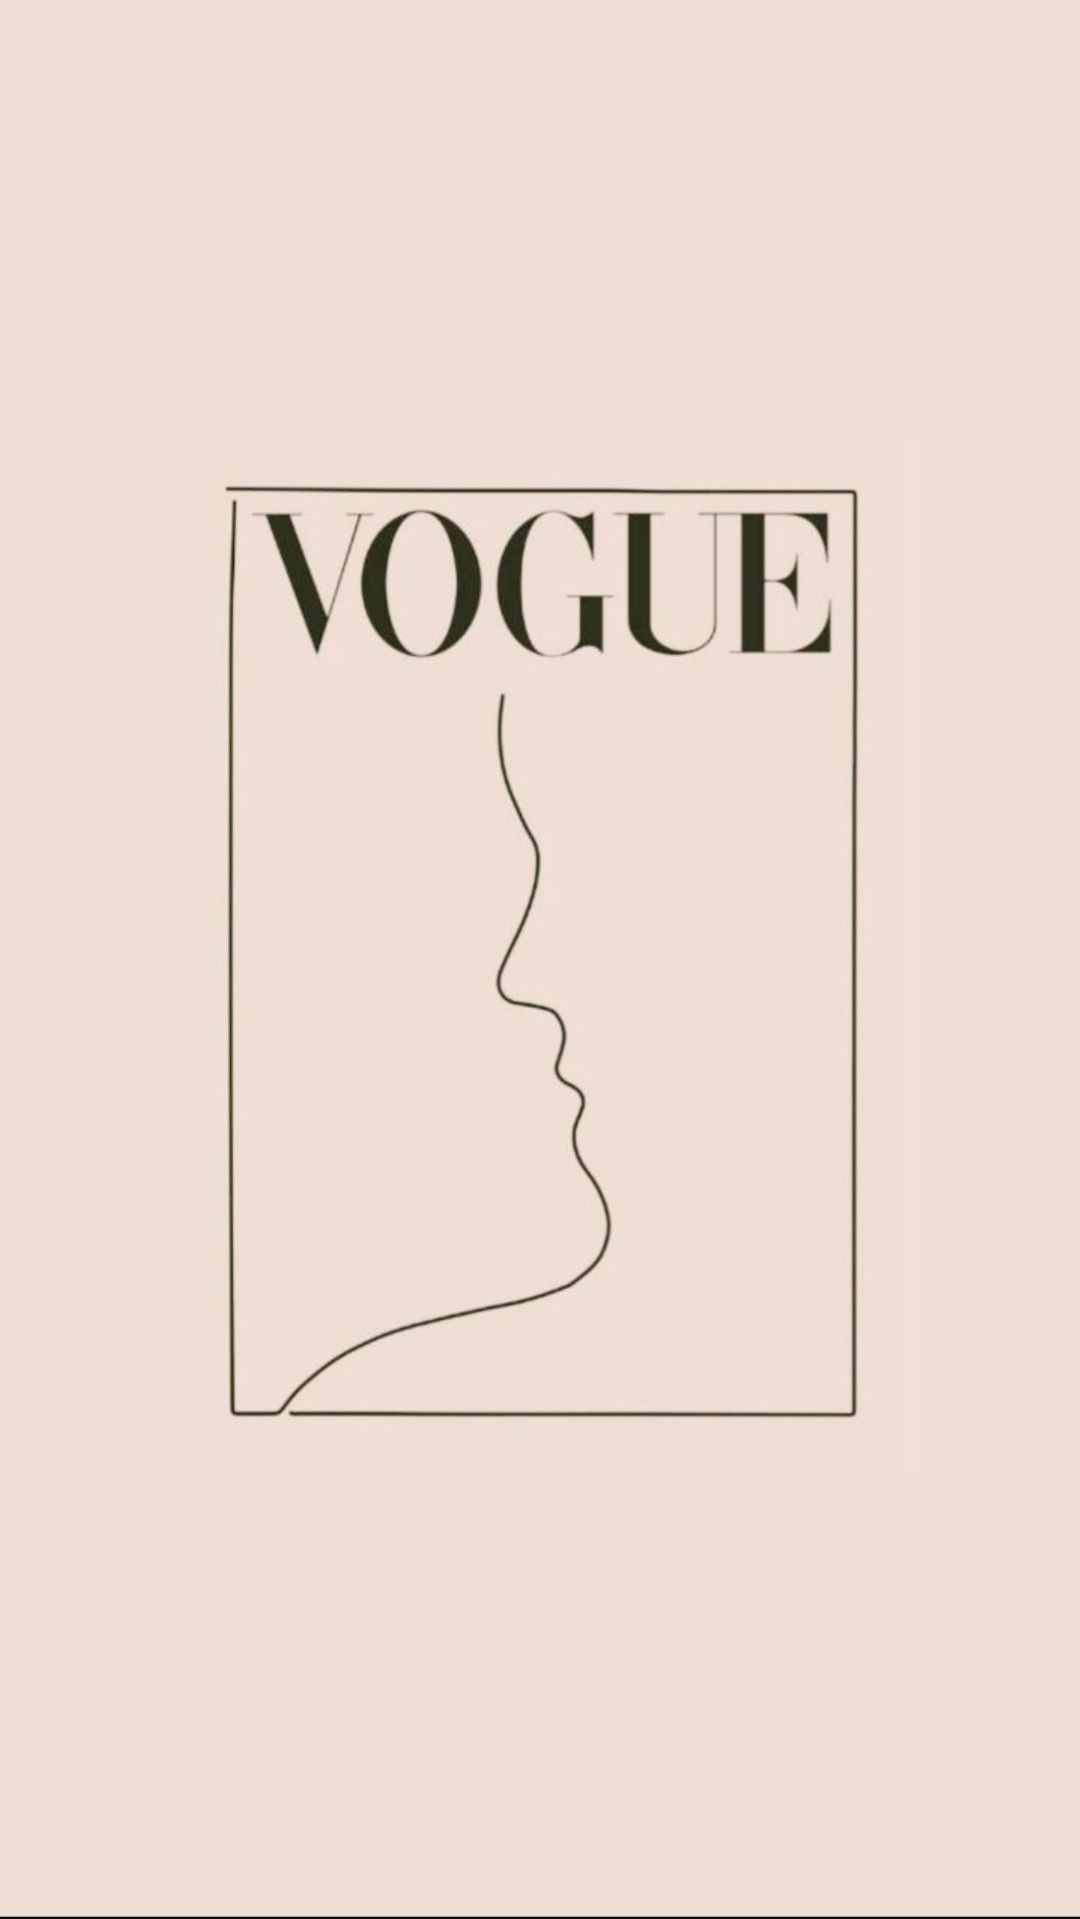 Vogue Aesthetic Wallpapers